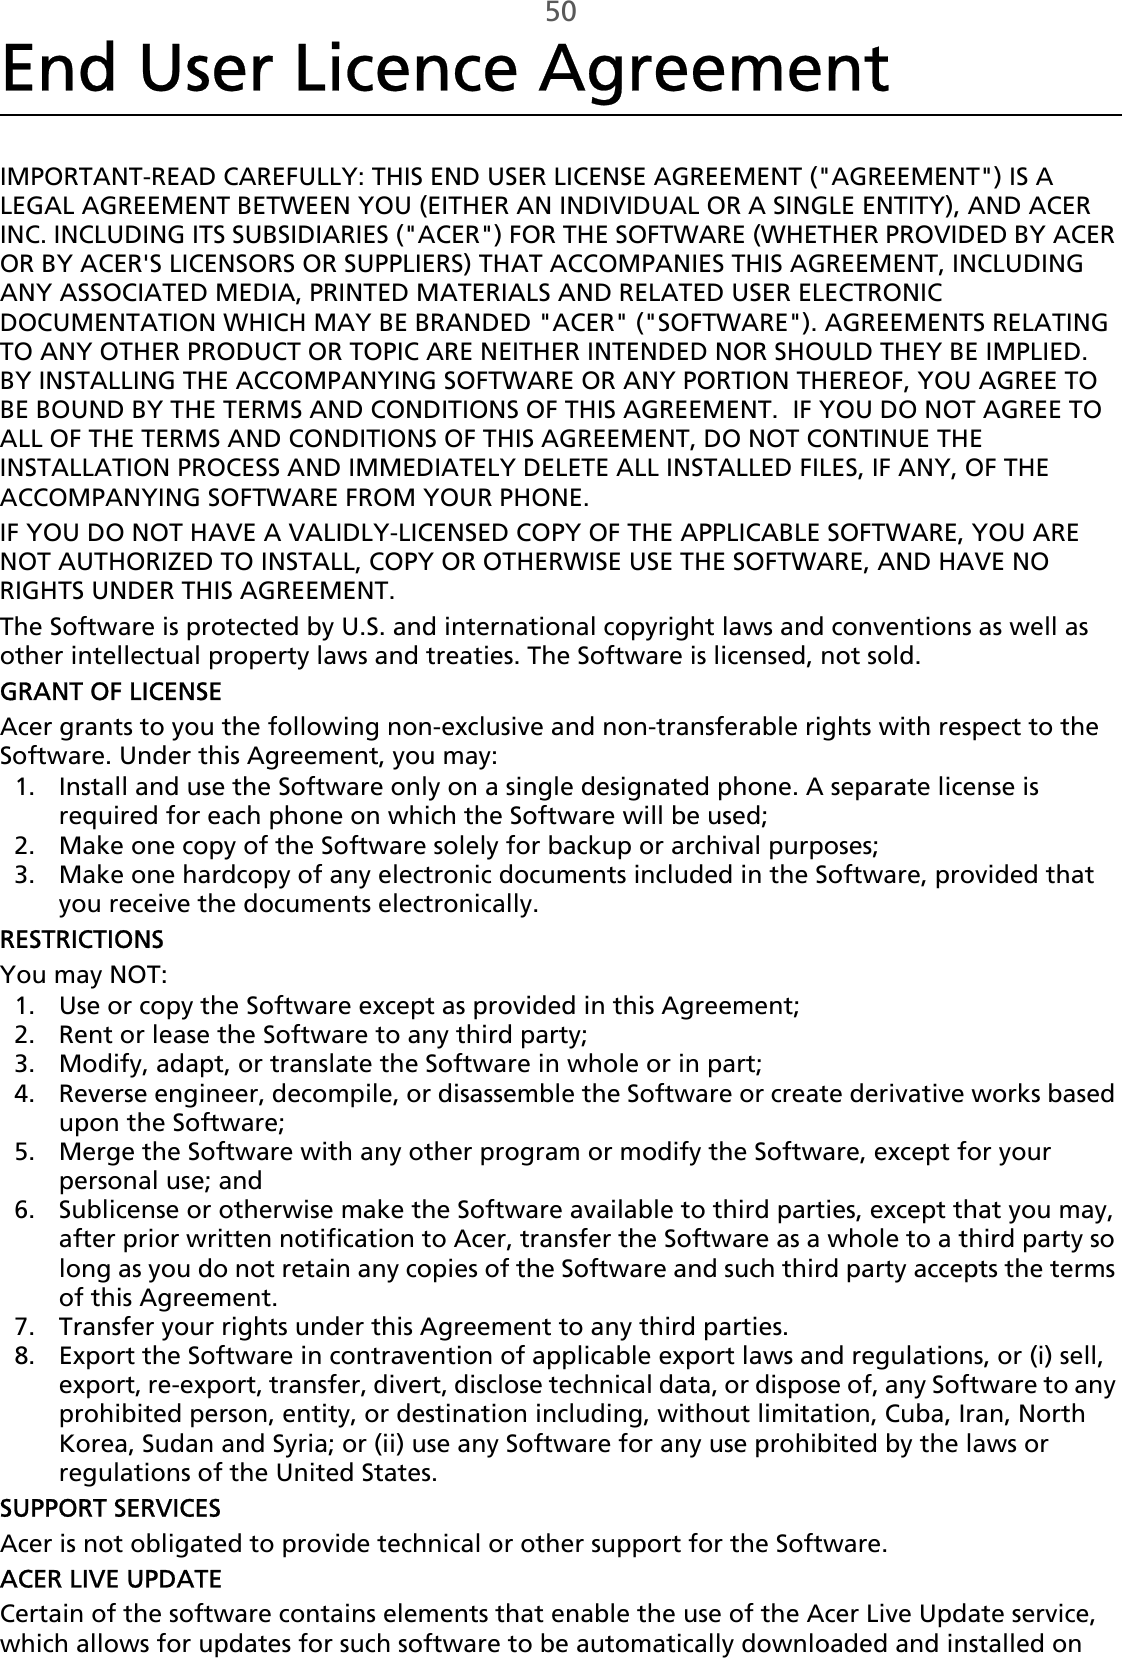 50End User Licence AgreementIMPORTANT-READ CAREFULLY: THIS END USER LICENSE AGREEMENT (&quot;AGREEMENT&quot;) IS A LEGAL AGREEMENT BETWEEN YOU (EITHER AN INDIVIDUAL OR A SINGLE ENTITY), AND ACER INC. INCLUDING ITS SUBSIDIARIES (&quot;ACER&quot;) FOR THE SOFTWARE (WHETHER PROVIDED BY ACER OR BY ACER&apos;S LICENSORS OR SUPPLIERS) THAT ACCOMPANIES THIS AGREEMENT, INCLUDING ANY ASSOCIATED MEDIA, PRINTED MATERIALS AND RELATED USER ELECTRONIC DOCUMENTATION WHICH MAY BE BRANDED &quot;ACER&quot; (&quot;SOFTWARE&quot;). AGREEMENTS RELATING TO ANY OTHER PRODUCT OR TOPIC ARE NEITHER INTENDED NOR SHOULD THEY BE IMPLIED.  BY INSTALLING THE ACCOMPANYING SOFTWARE OR ANY PORTION THEREOF, YOU AGREE TO BE BOUND BY THE TERMS AND CONDITIONS OF THIS AGREEMENT.  IF YOU DO NOT AGREE TO ALL OF THE TERMS AND CONDITIONS OF THIS AGREEMENT, DO NOT CONTINUE THE INSTALLATION PROCESS AND IMMEDIATELY DELETE ALL INSTALLED FILES, IF ANY, OF THE ACCOMPANYING SOFTWARE FROM YOUR PHONE.IF YOU DO NOT HAVE A VALIDLY-LICENSED COPY OF THE APPLICABLE SOFTWARE, YOU ARE NOT AUTHORIZED TO INSTALL, COPY OR OTHERWISE USE THE SOFTWARE, AND HAVE NO RIGHTS UNDER THIS AGREEMENT.The Software is protected by U.S. and international copyright laws and conventions as well as other intellectual property laws and treaties. The Software is licensed, not sold.GRANT OF LICENSEAcer grants to you the following non-exclusive and non-transferable rights with respect to the Software. Under this Agreement, you may:1. Install and use the Software only on a single designated phone. A separate license is required for each phone on which the Software will be used;2. Make one copy of the Software solely for backup or archival purposes;3. Make one hardcopy of any electronic documents included in the Software, provided that you receive the documents electronically.RESTRICTIONSYou may NOT:1. Use or copy the Software except as provided in this Agreement;2. Rent or lease the Software to any third party;3. Modify, adapt, or translate the Software in whole or in part;4. Reverse engineer, decompile, or disassemble the Software or create derivative works based upon the Software;5. Merge the Software with any other program or modify the Software, except for your personal use; and6. Sublicense or otherwise make the Software available to third parties, except that you may, after prior written notification to Acer, transfer the Software as a whole to a third party so long as you do not retain any copies of the Software and such third party accepts the terms of this Agreement.7. Transfer your rights under this Agreement to any third parties.8. Export the Software in contravention of applicable export laws and regulations, or (i) sell, export, re-export, transfer, divert, disclose technical data, or dispose of, any Software to any prohibited person, entity, or destination including, without limitation, Cuba, Iran, North Korea, Sudan and Syria; or (ii) use any Software for any use prohibited by the laws or regulations of the United States.SUPPORT SERVICESAcer is not obligated to provide technical or other support for the Software.ACER LIVE UPDATECertain of the software contains elements that enable the use of the Acer Live Update service, which allows for updates for such software to be automatically downloaded and installed on 